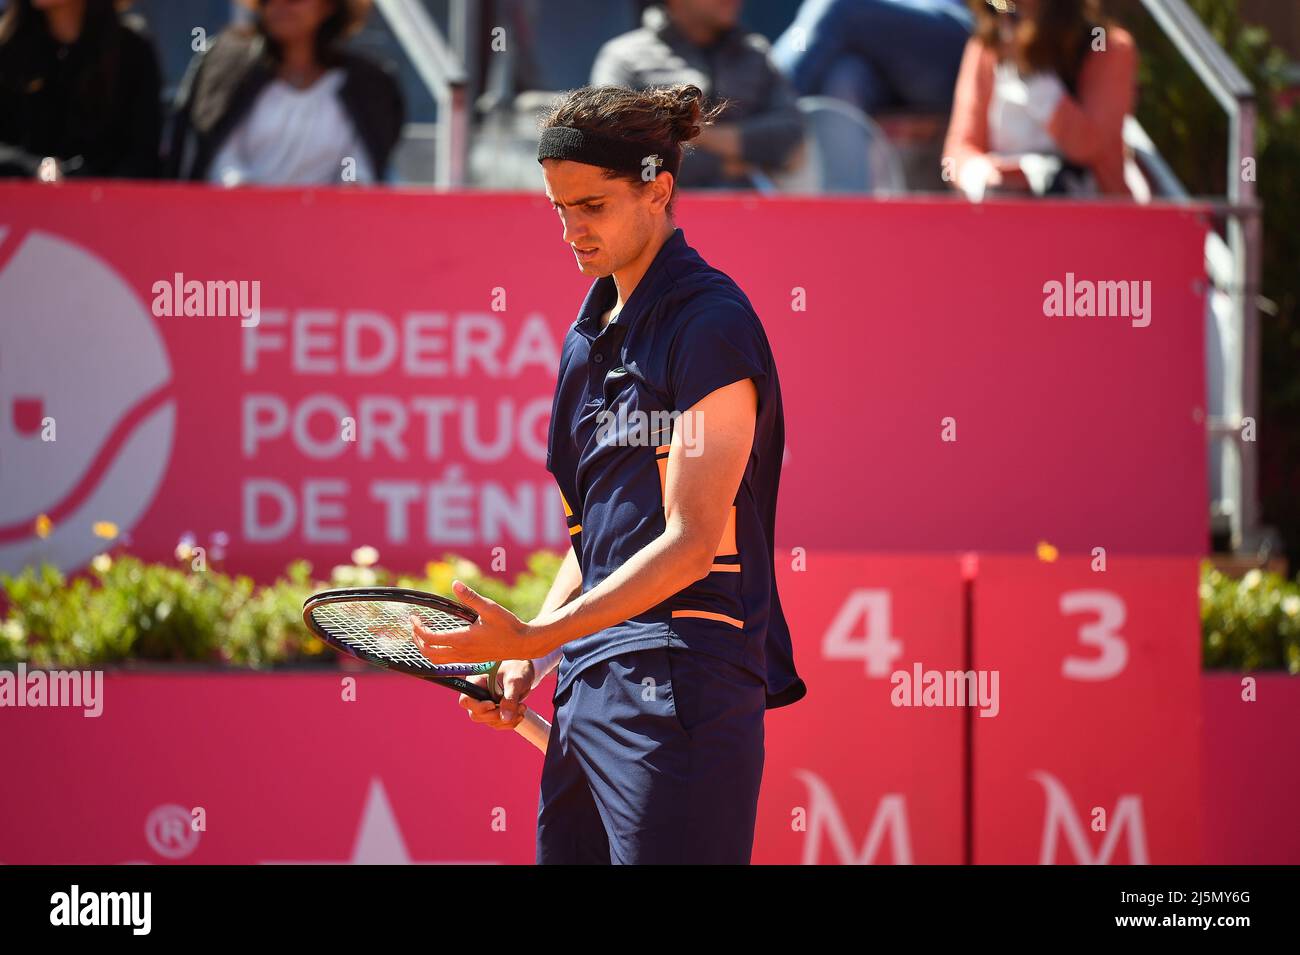 Estoril, Portugal. 24th Apr, 2022. Pierre-Hugues Herbert from France reacts  during the Millennium Estoril Open Final ATP 250 tennis tournament at the  Clube de Tenis do Estoril. Final score: Pierre-Hugues Herbert 2:1